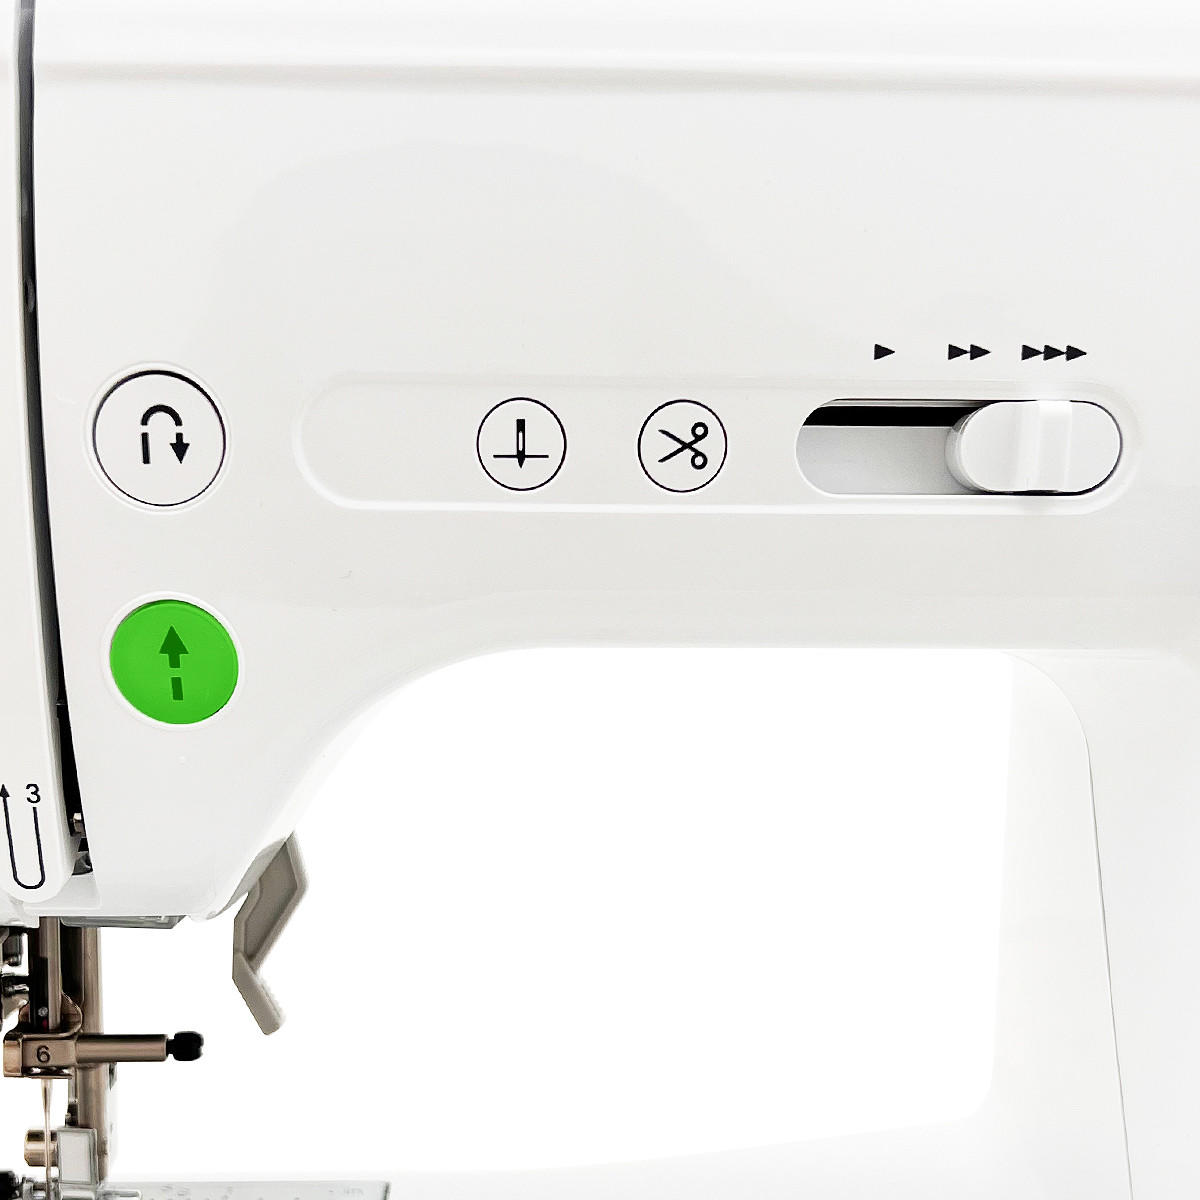 Brother SE630 Sewing and Embroidery Machine refurbished 25 Year